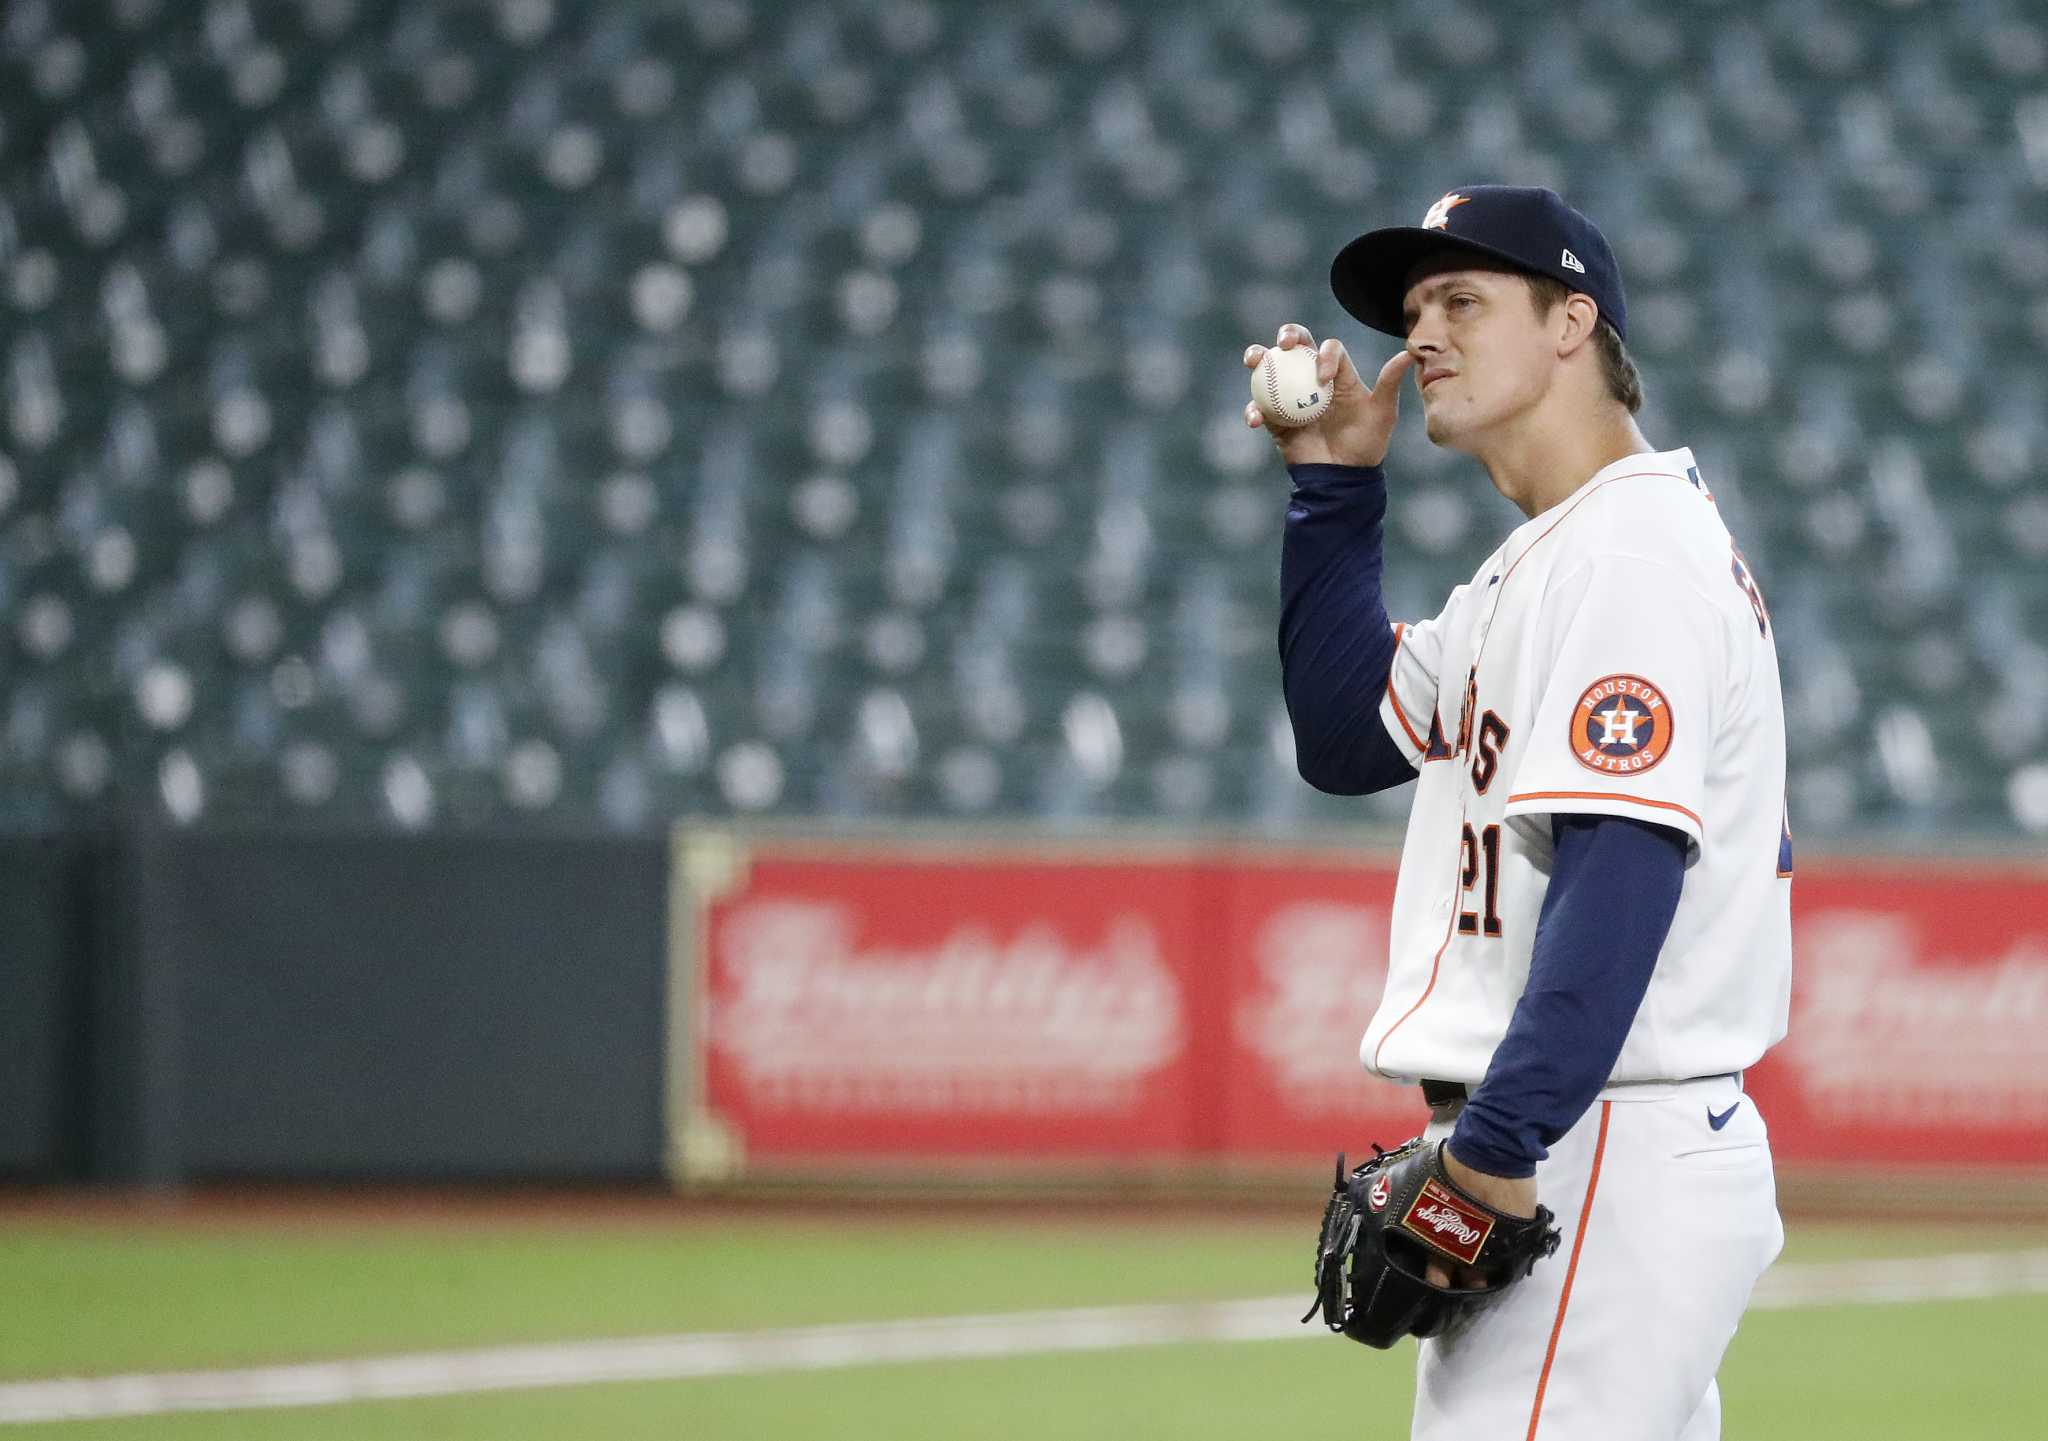 Astros – Guardians: Zack Greinke smiles at music used by Myles Straw